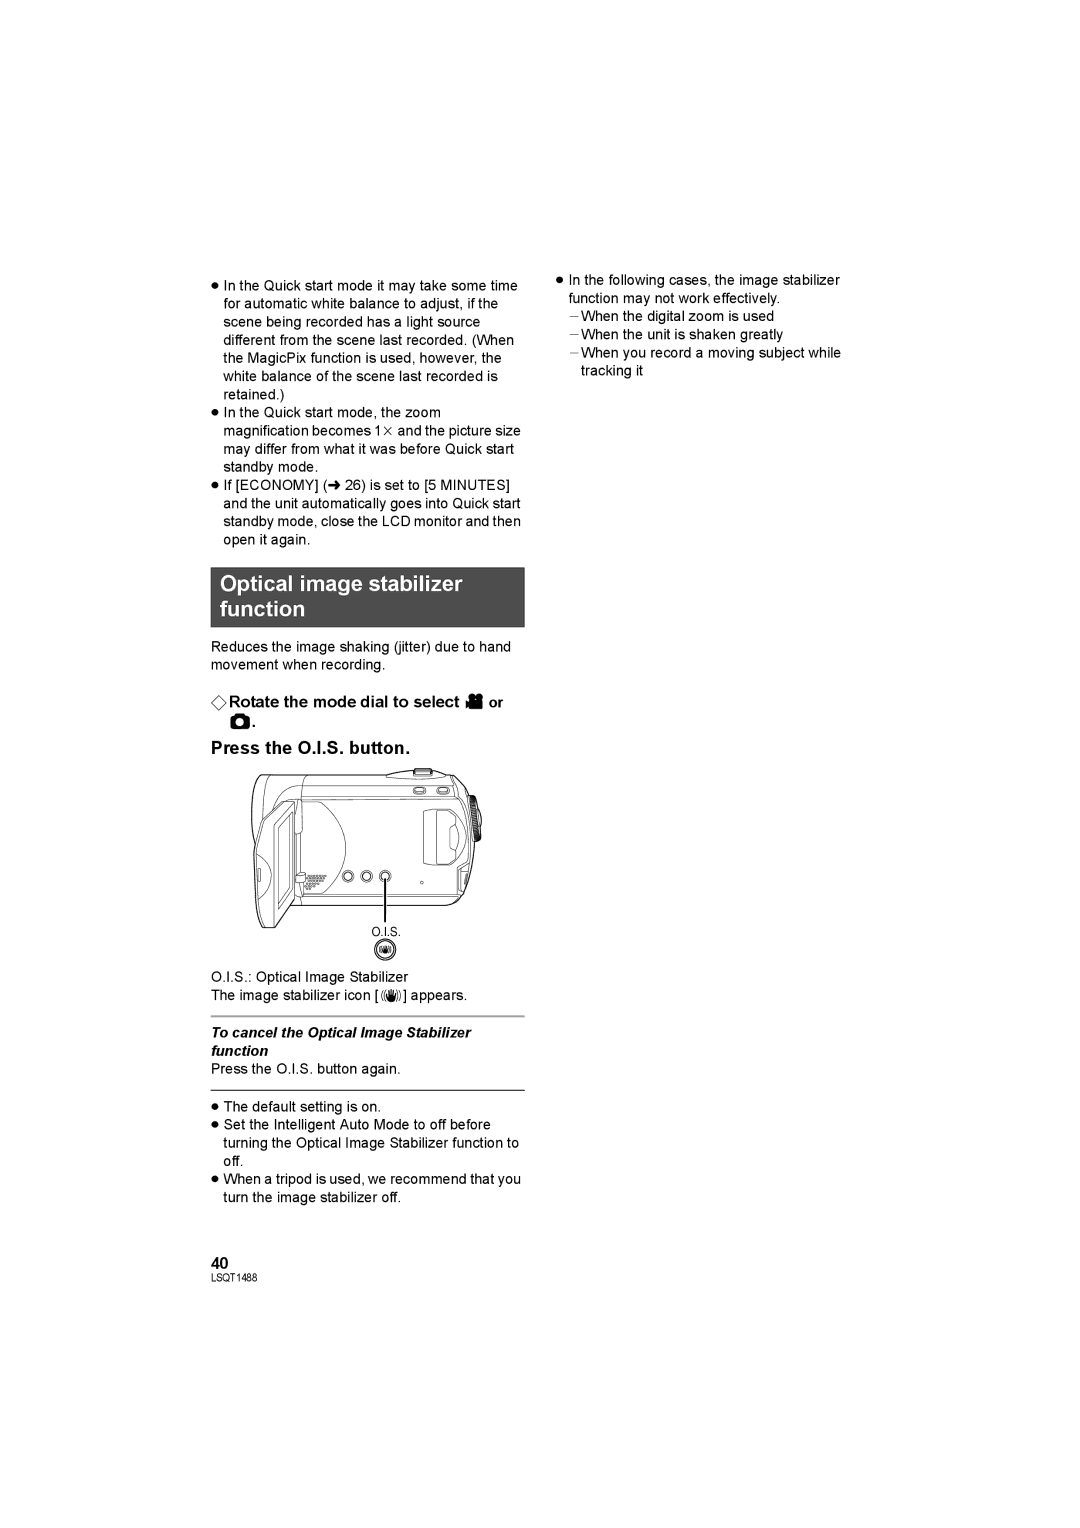 Panasonic SDR-S26PC operating instructions Optical image stabilizer function, Press the O.I.S. button 